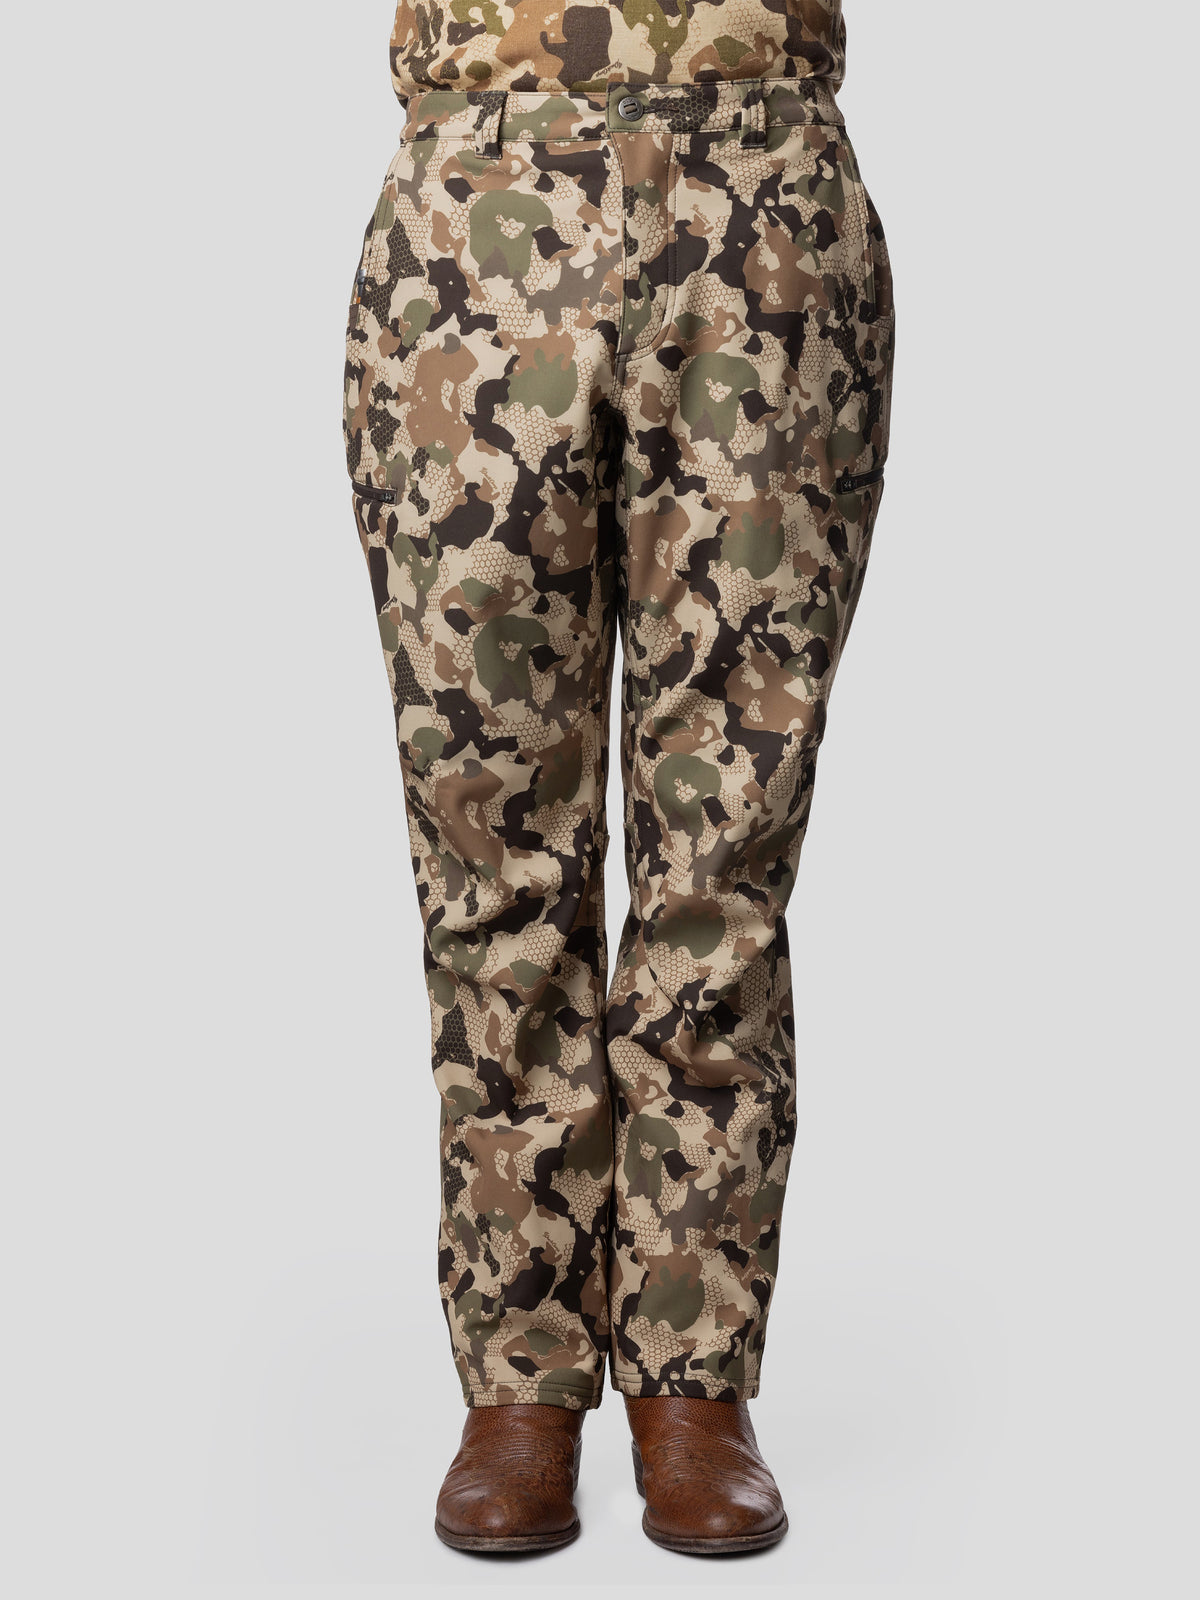 Contact Softshell Pant - Wetland Camouflage – Duck Camp